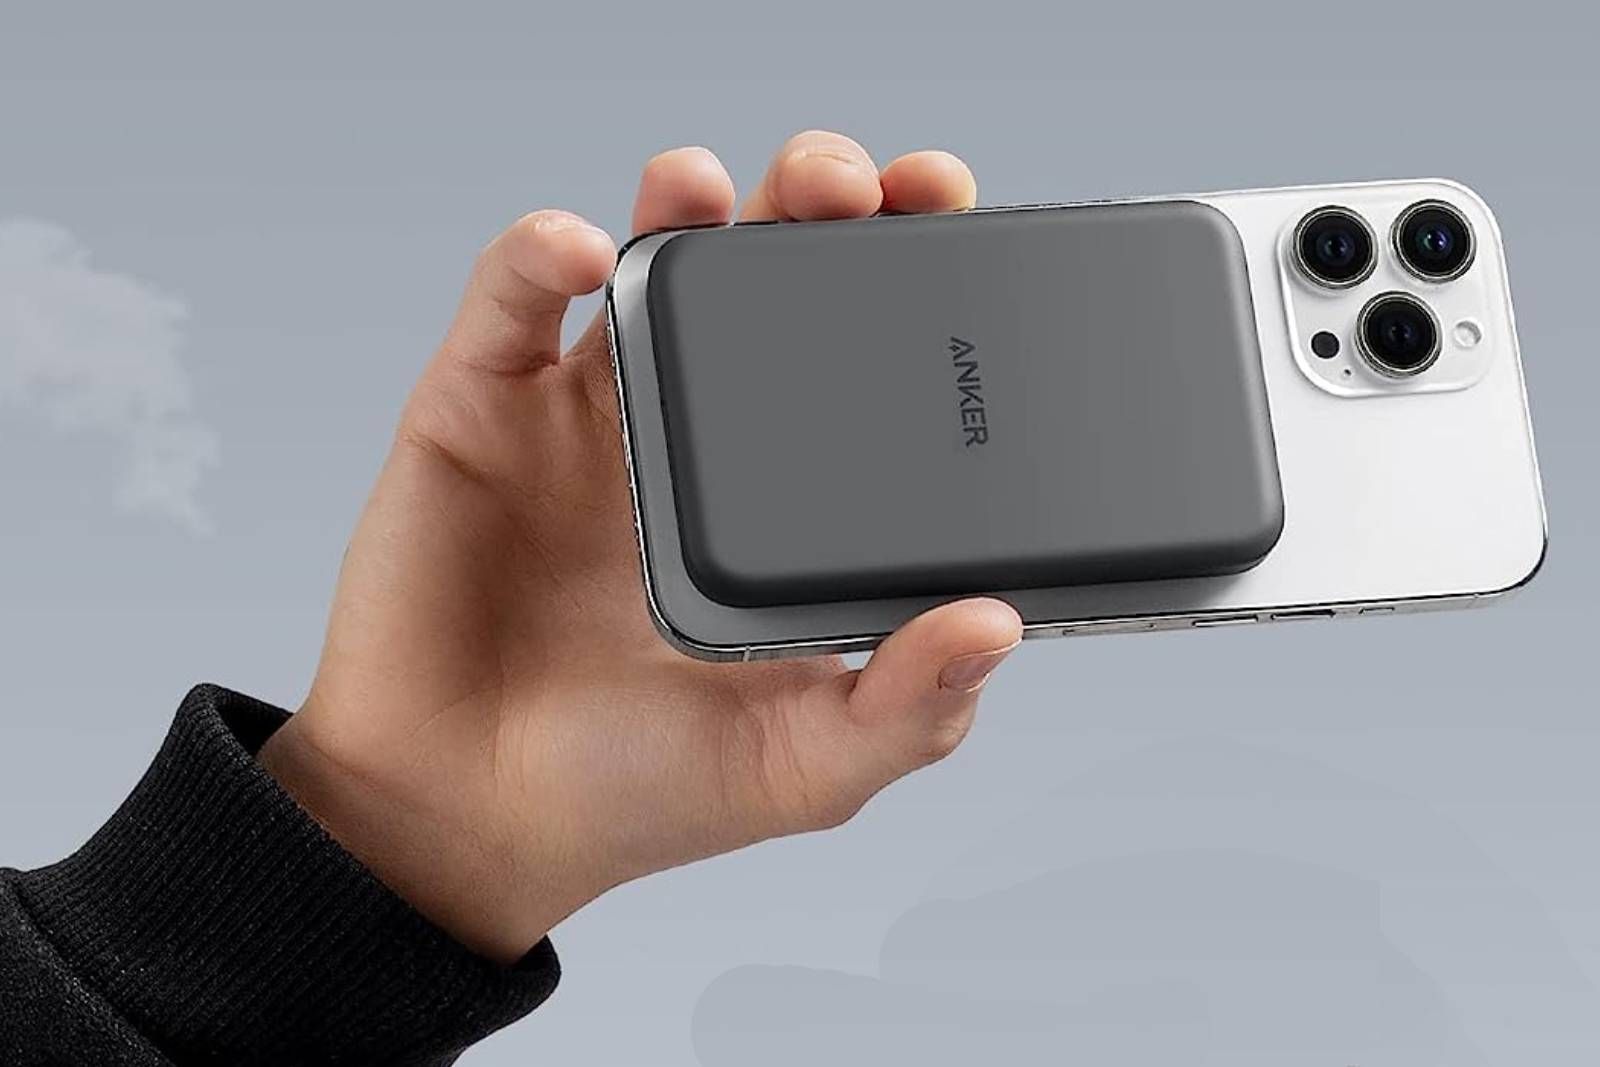 Anker’s magnetic portable battery for iPhone has just hit its lowest price yet at $30